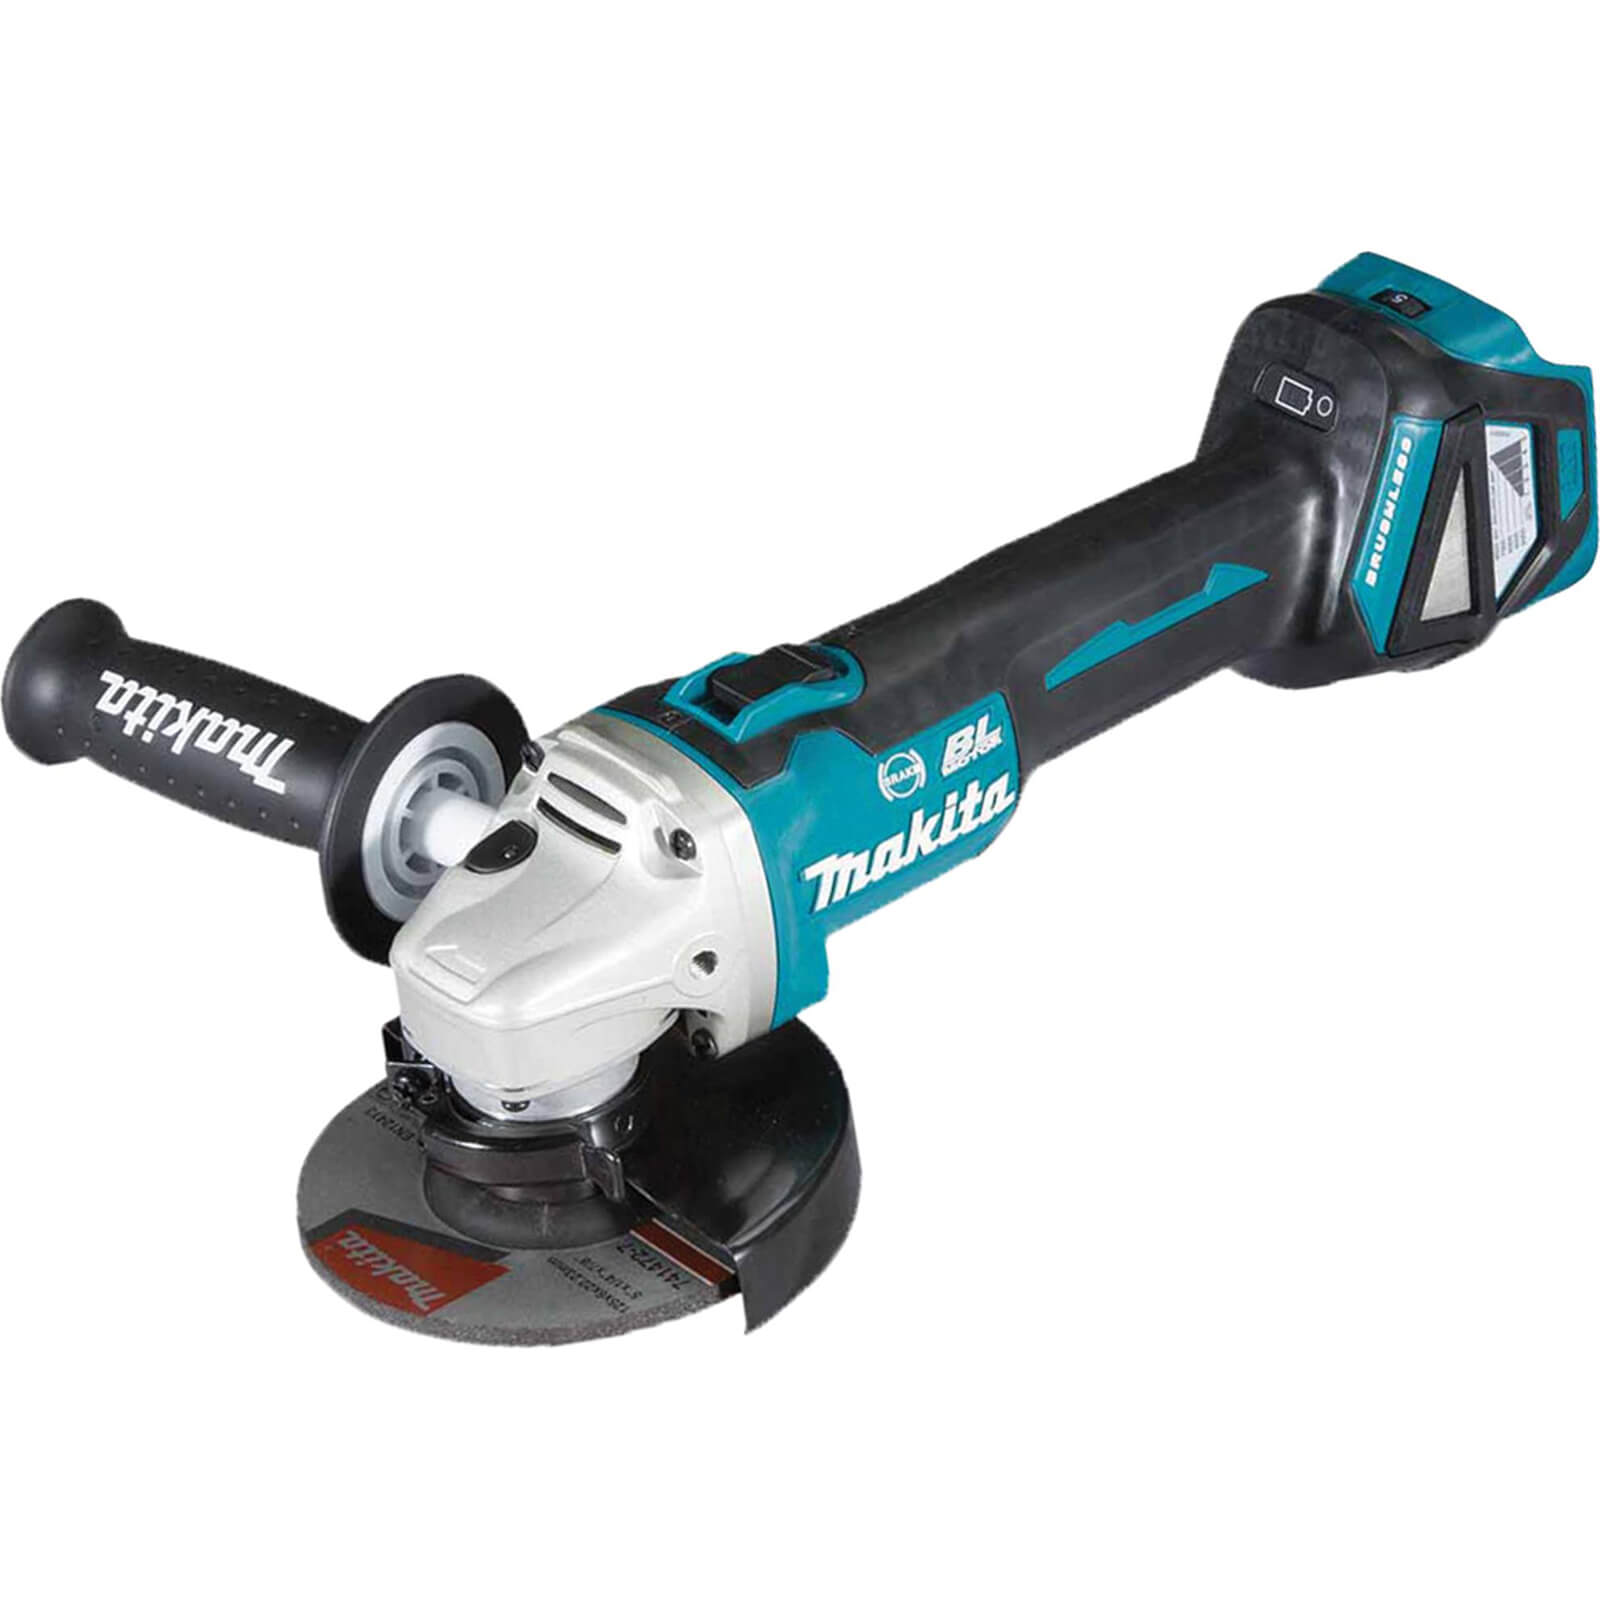 Makita DGA513 18v LXT Cordless Brushless Slide Switch Angle Grinder 125mm No Batteries No Charger No Case